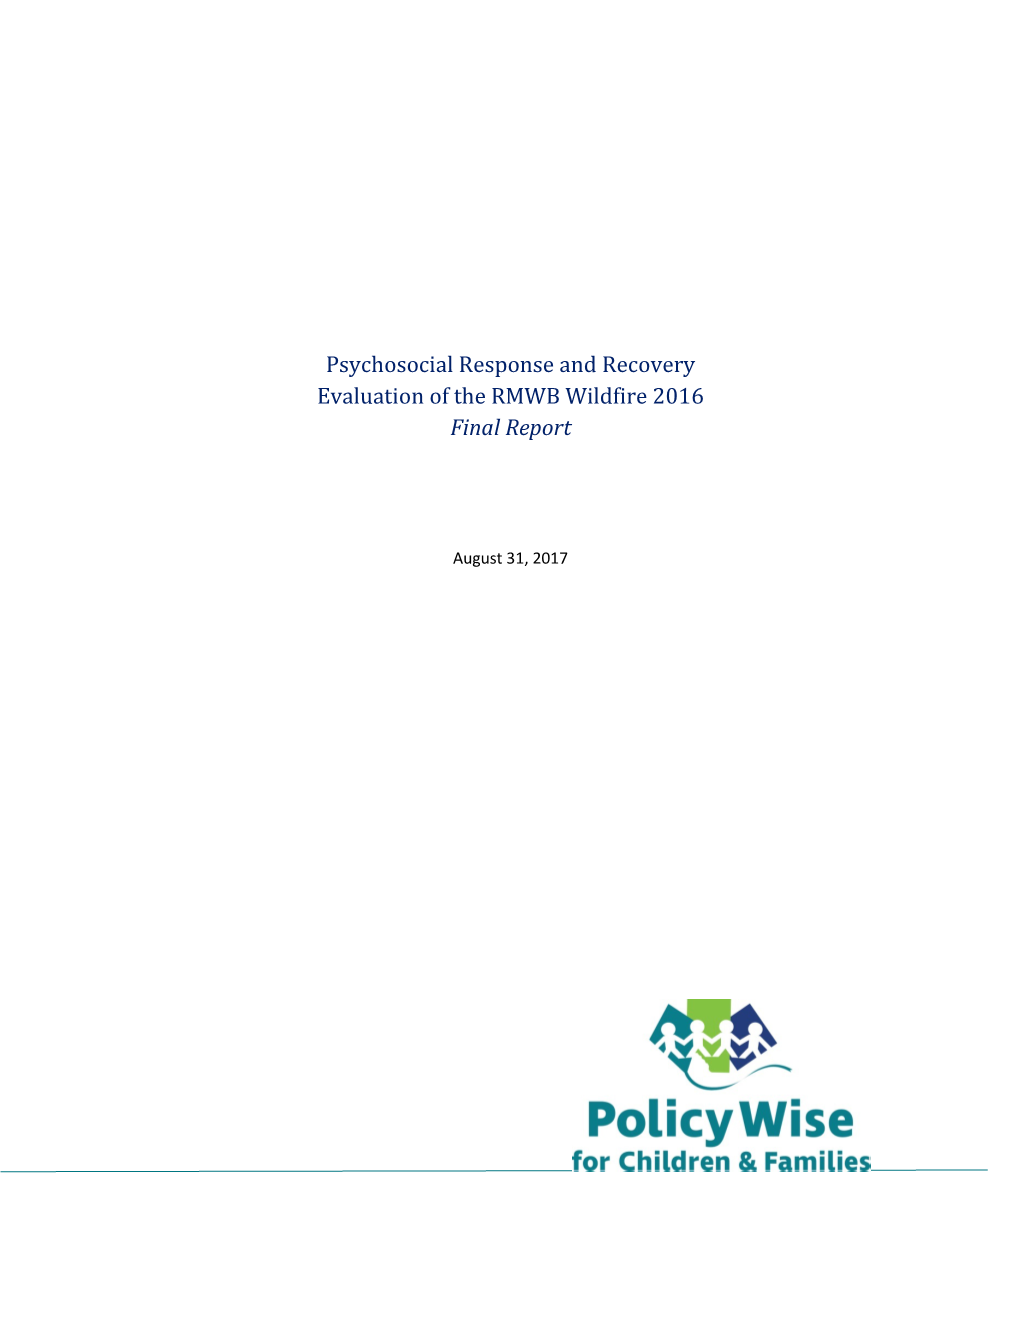 Psychosocial Response and Recovery Evaluation of the RMWB Wildfire 2016 Final Report